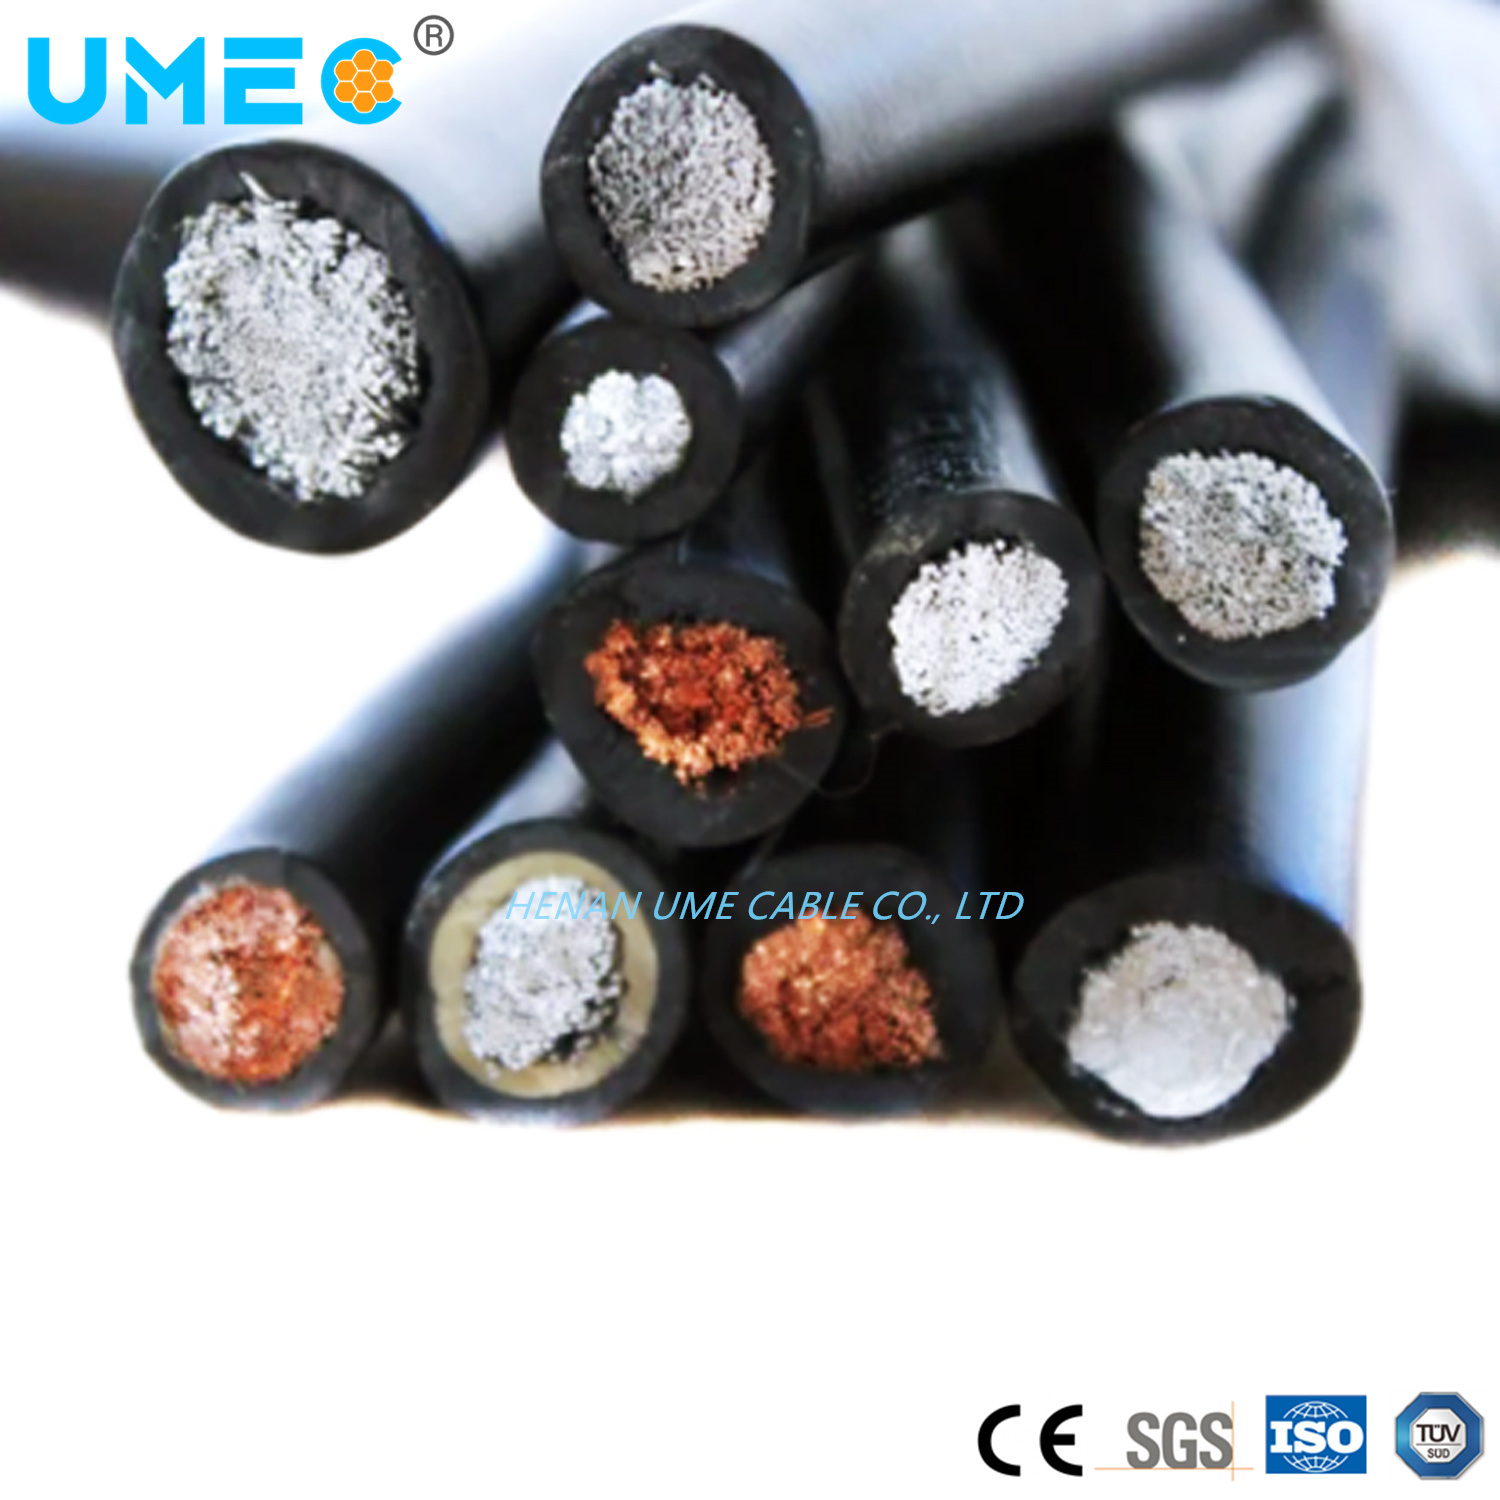 Light-Type Rubber Sheathed Flexible Cable